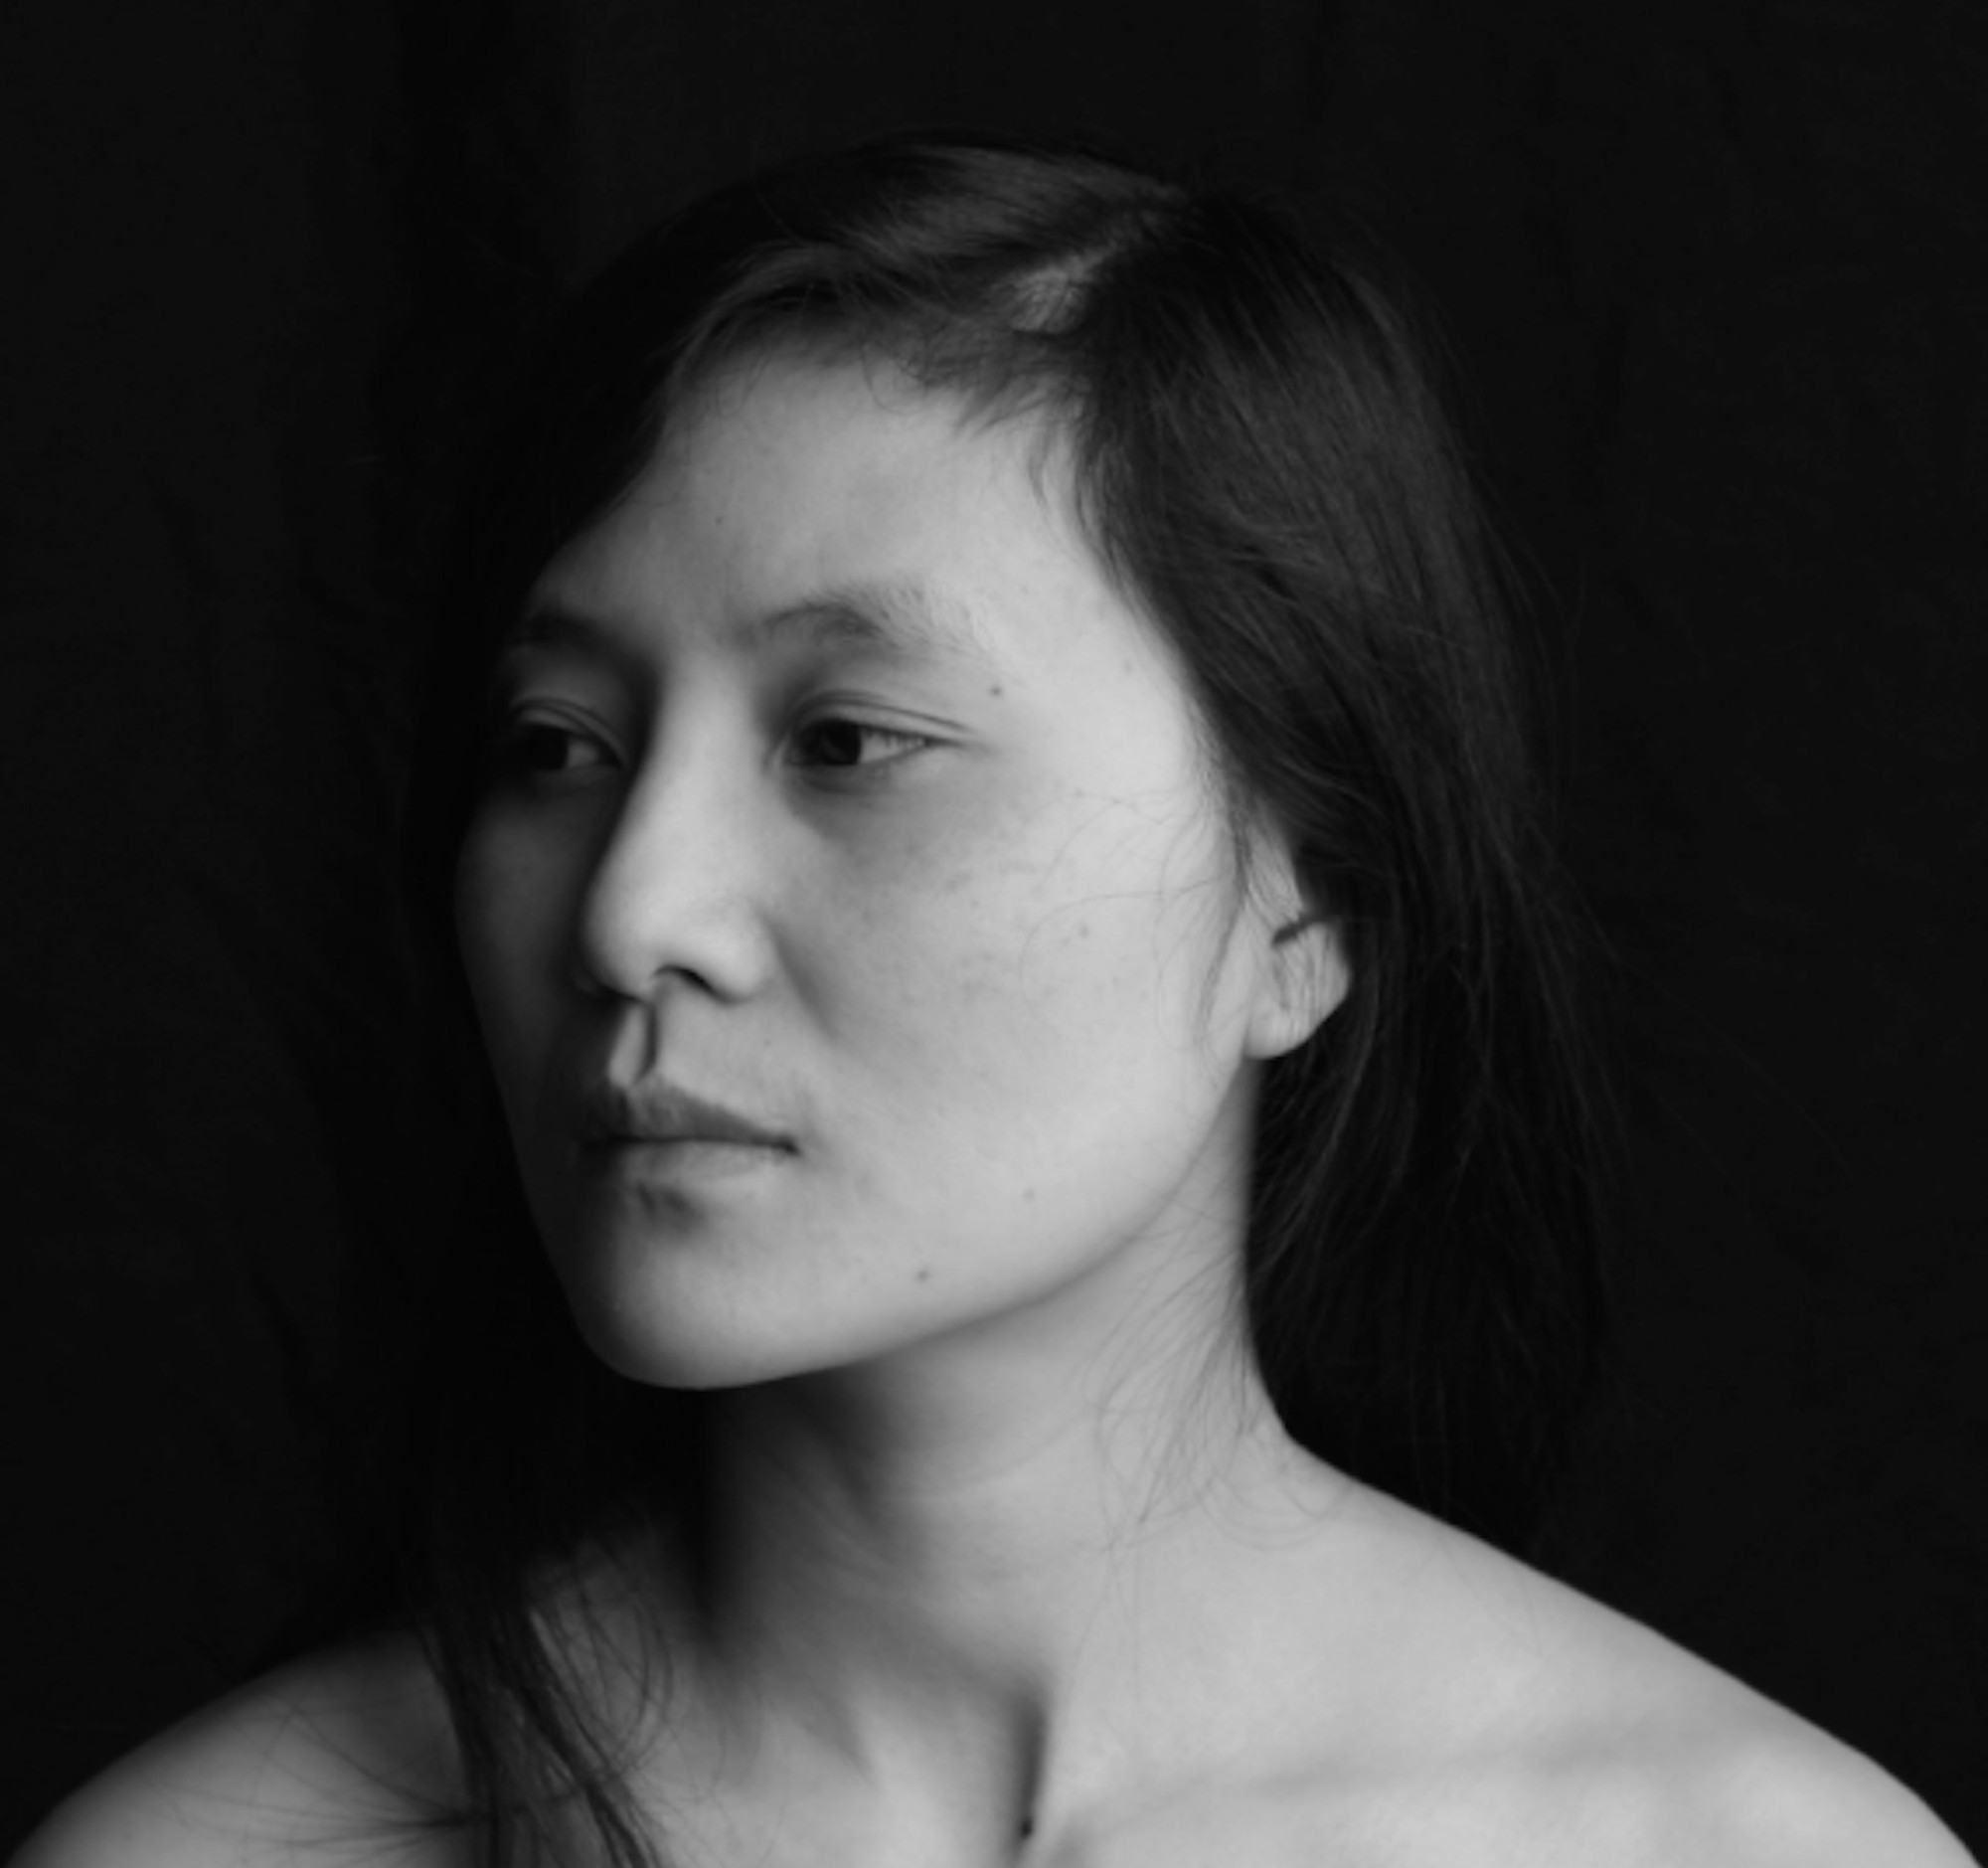 In this black and white portrait, Vi Khi Nao stands in front of a black background, looking off to the side